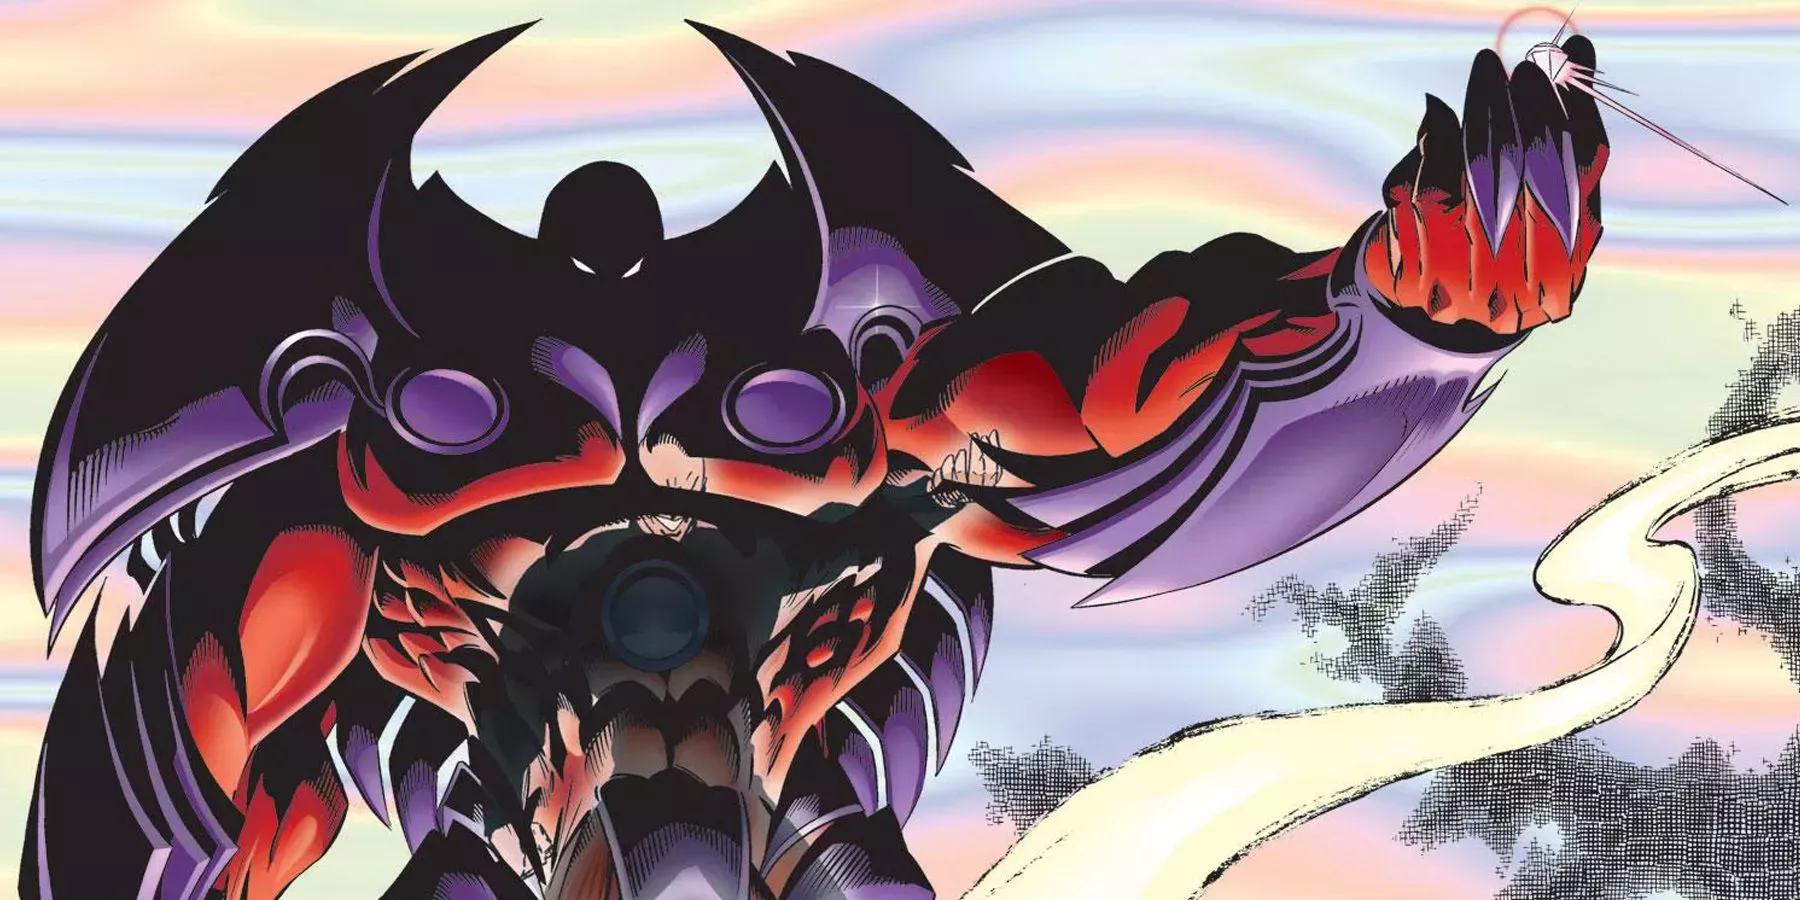 Onslaught menacingly towering over the world in Marvel Comics